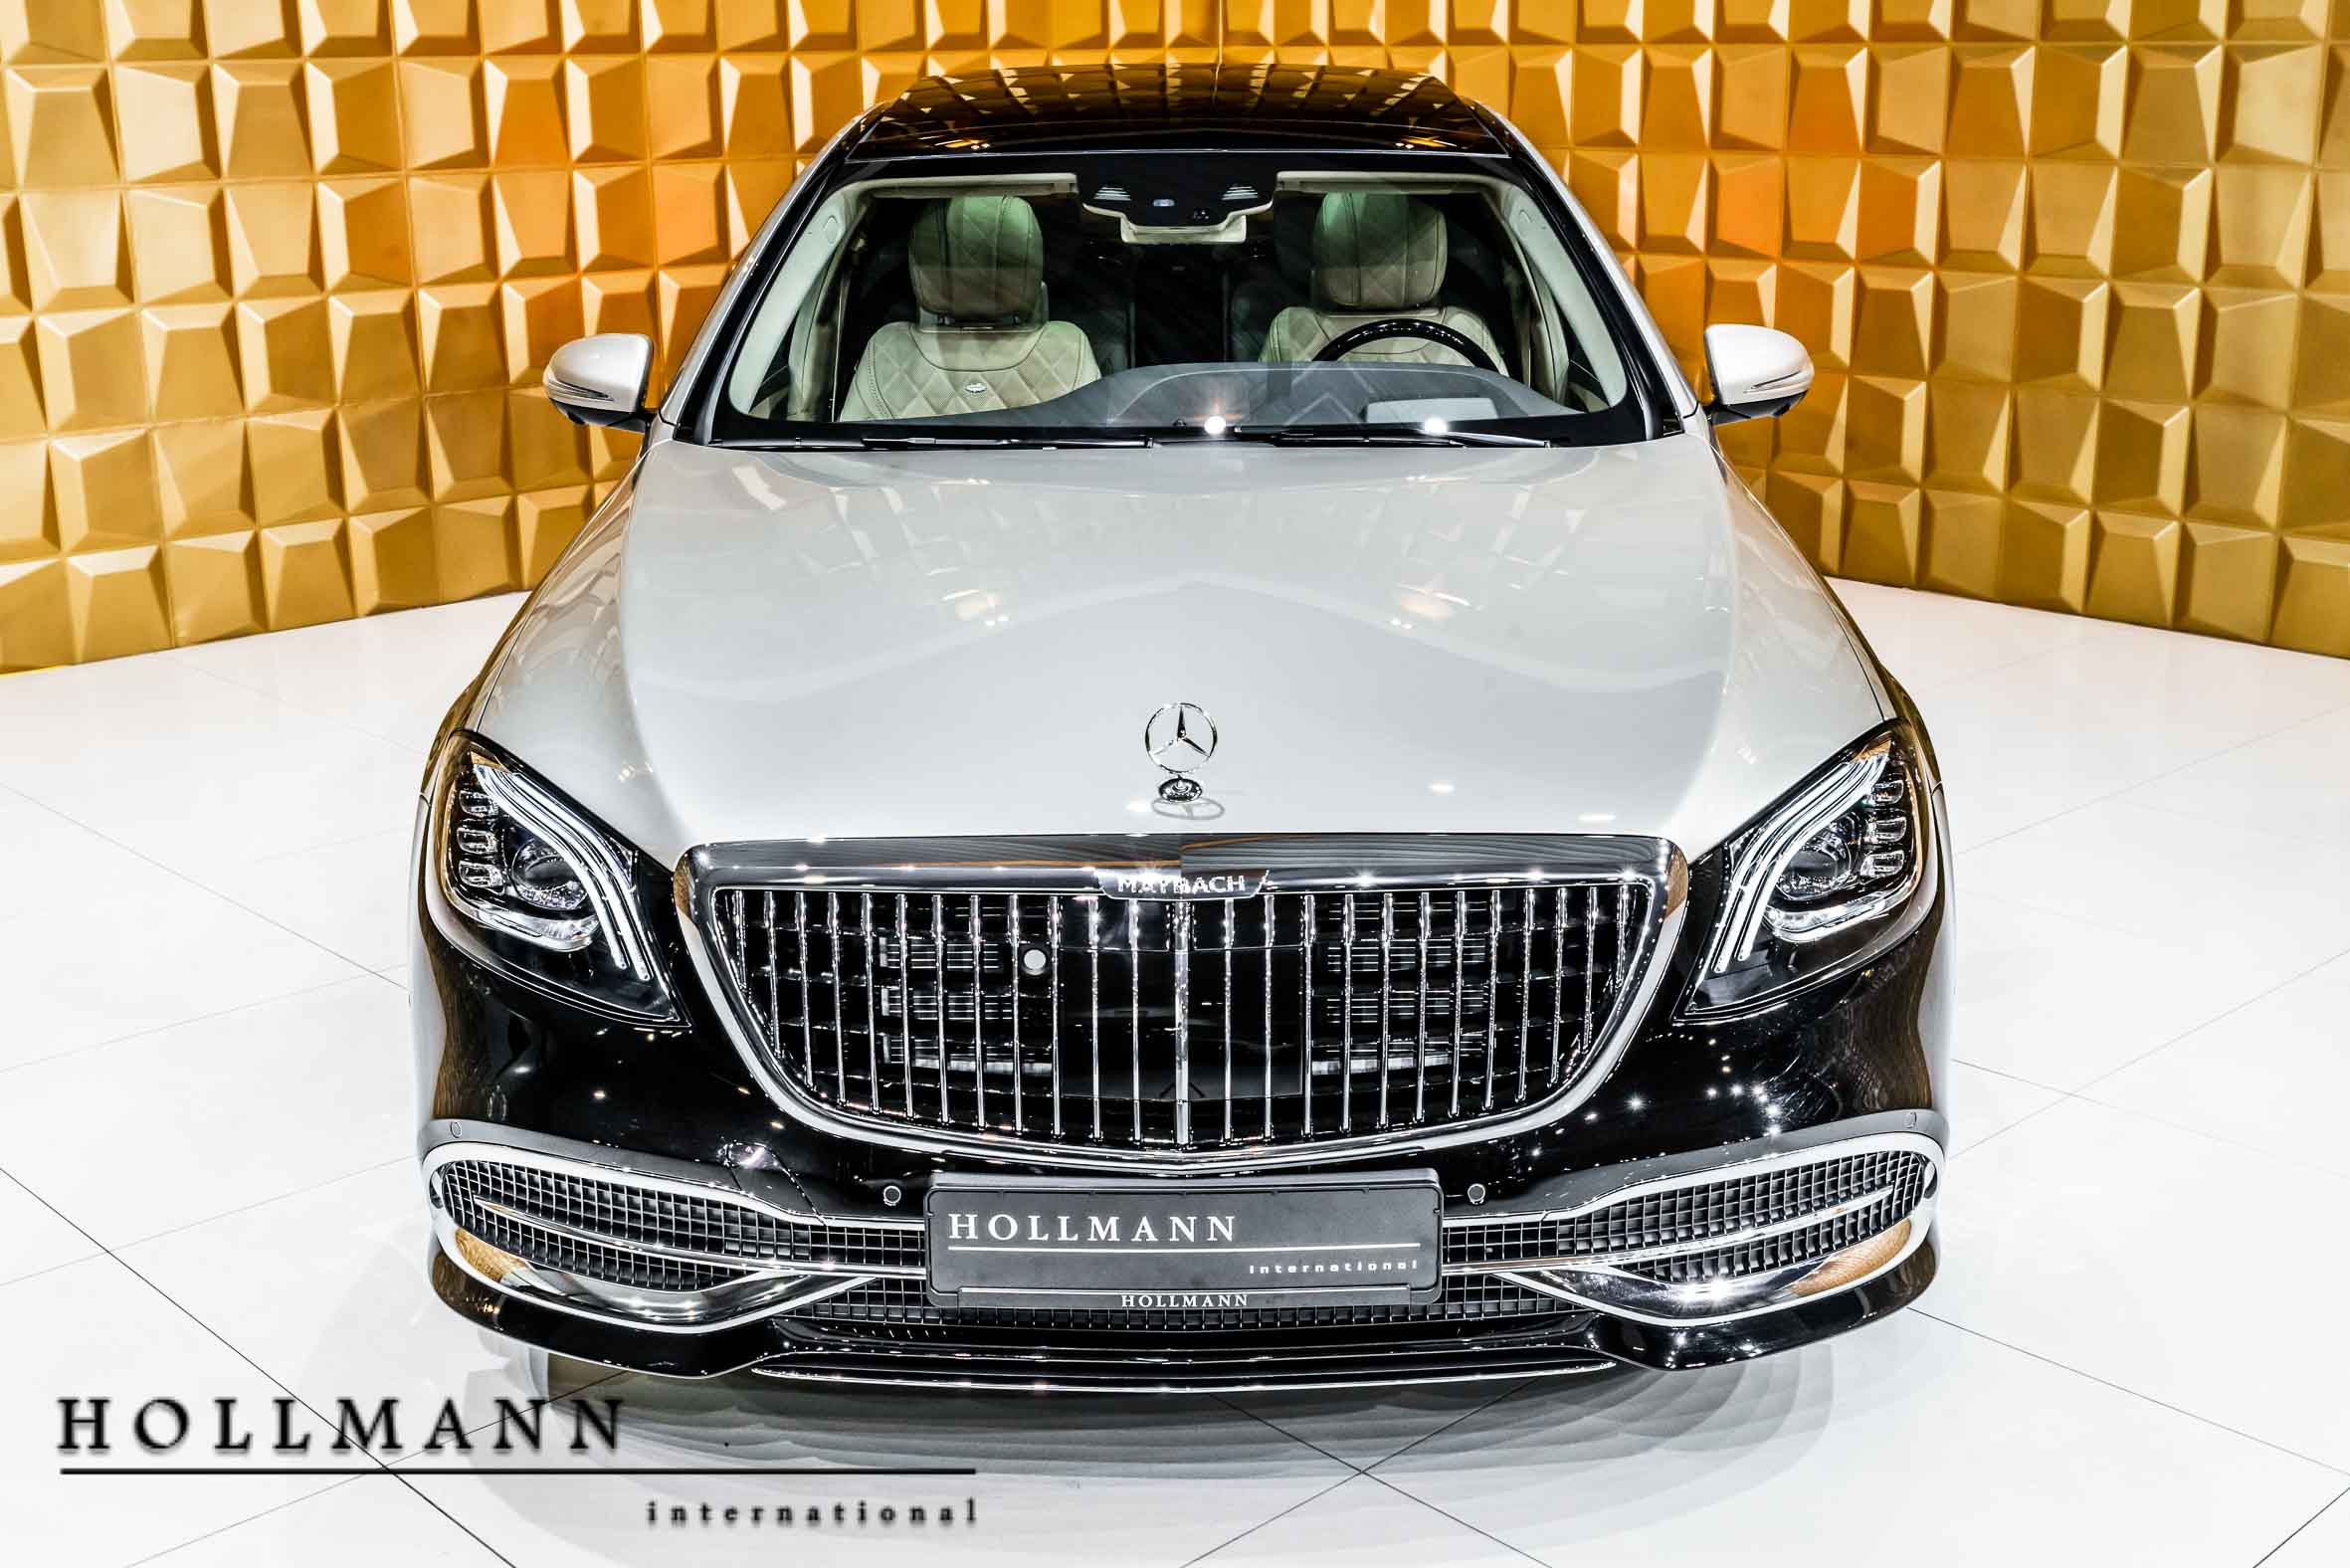 Mercedes Maybach S560 4m Luxury Pulse Cars Germany For Sale On Luxurypulse